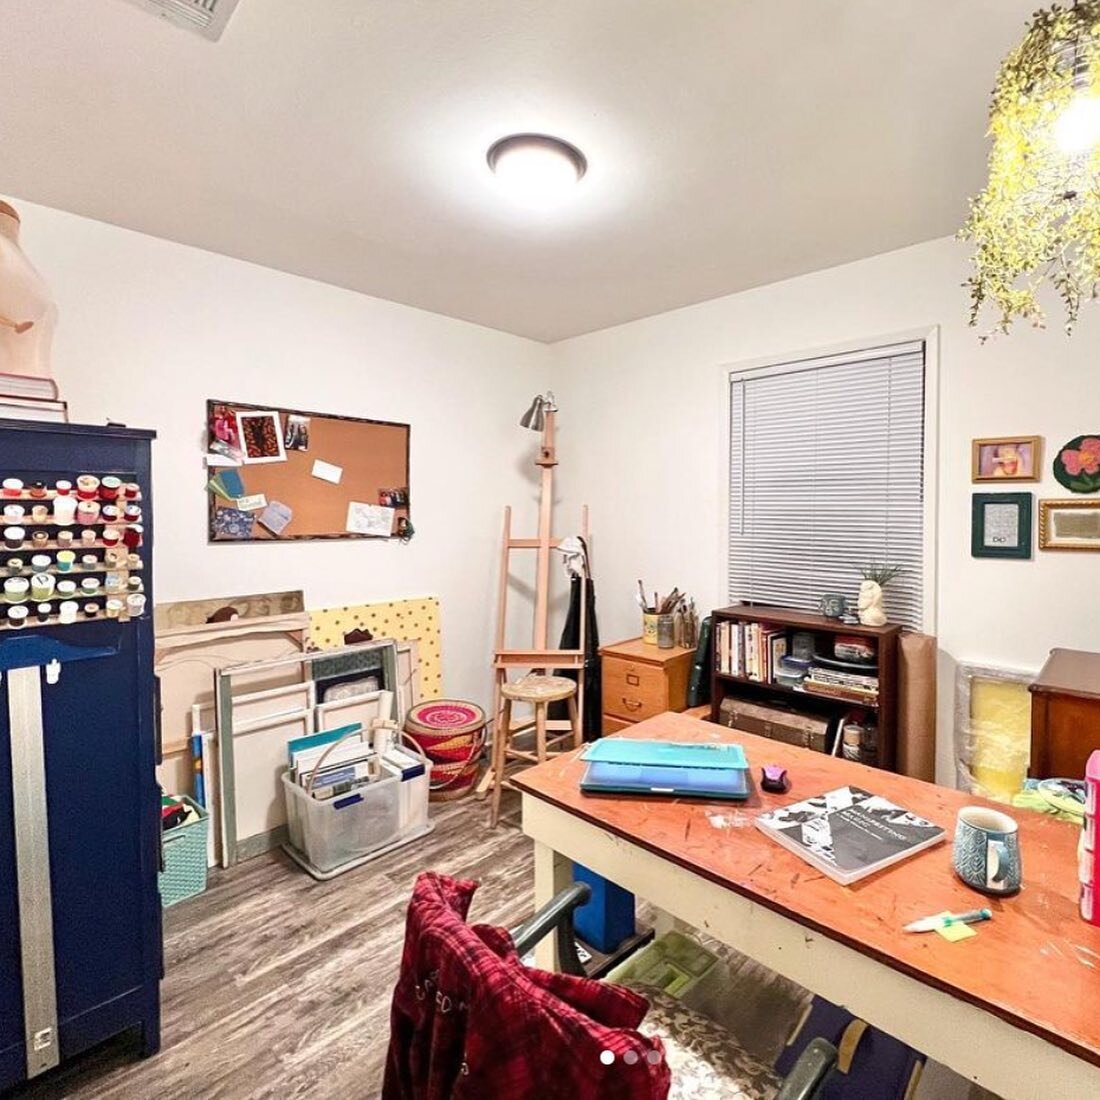 Check out the inspiring studio space from network member @kaylalouviereart!! We love your space, Kayla!

Please start using #thrivetogetherstudio so we can see the spaces where you make your art (and maybe the small people, pets, or yourselves inside